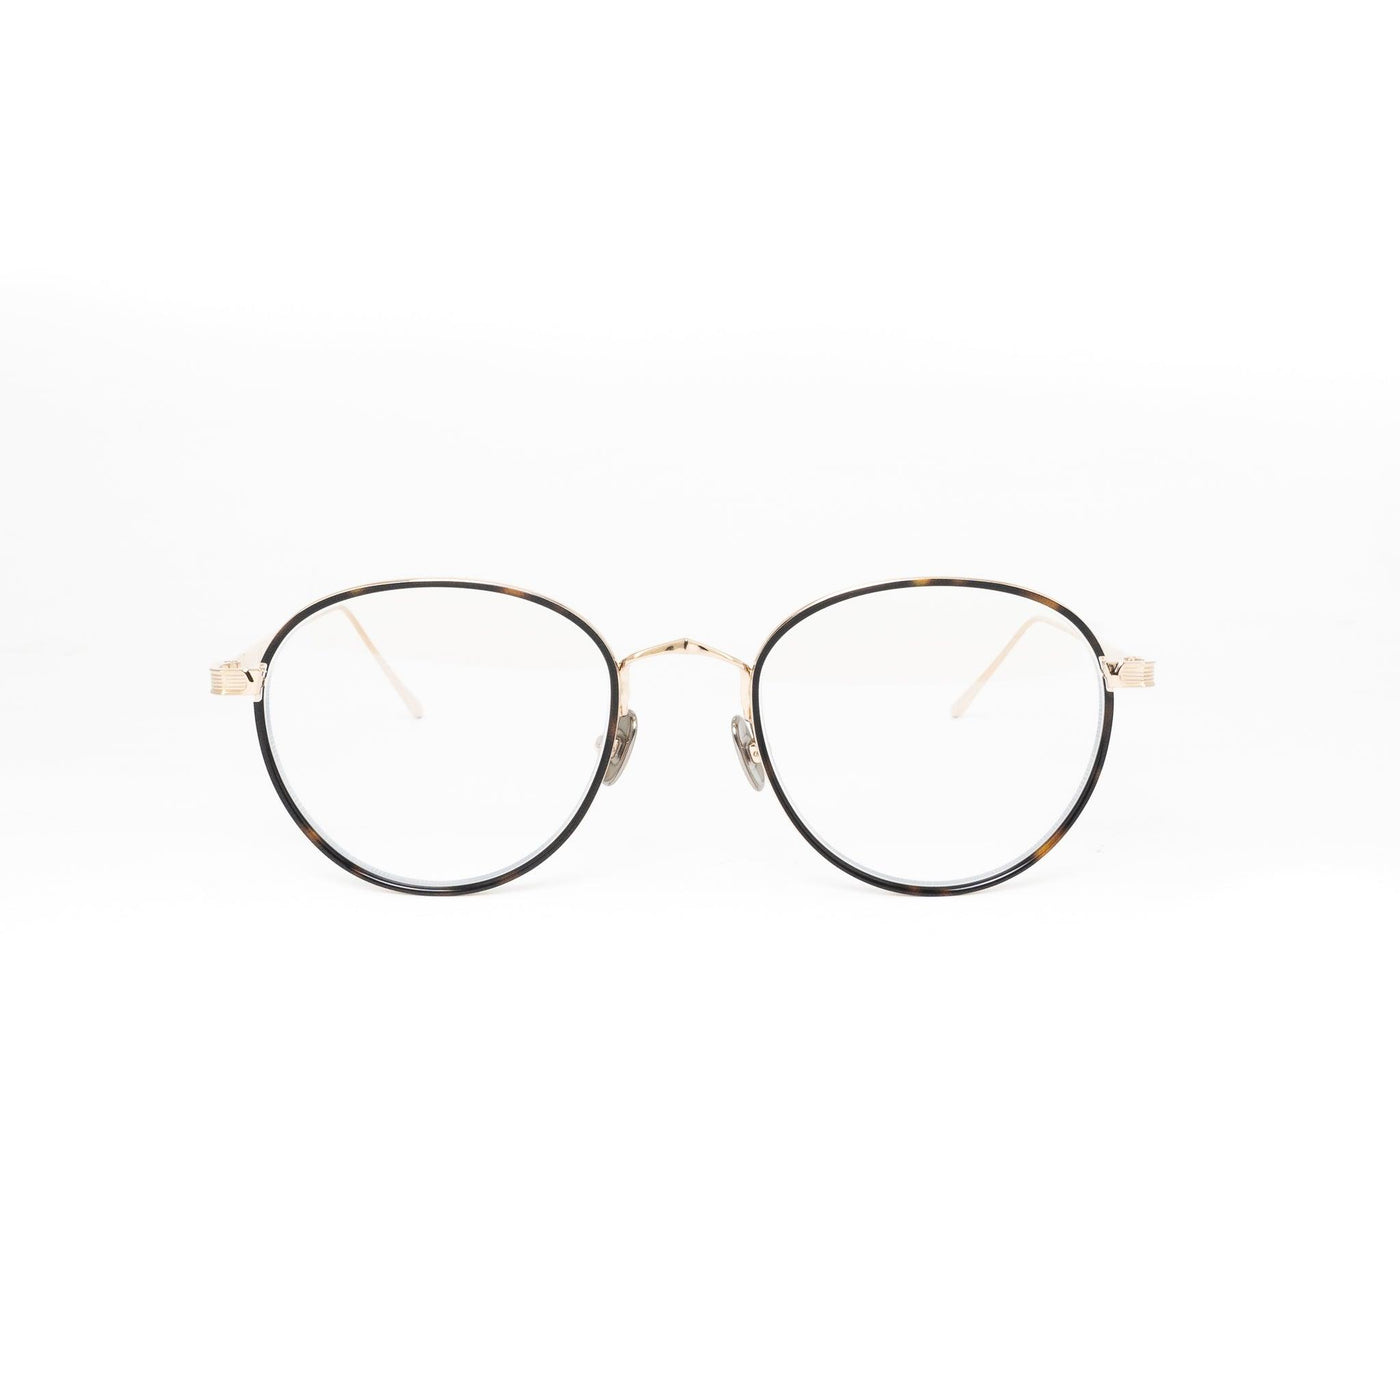 Cartier CT0250O/006 | Eyeglasses - Vision Express Optical Philippines